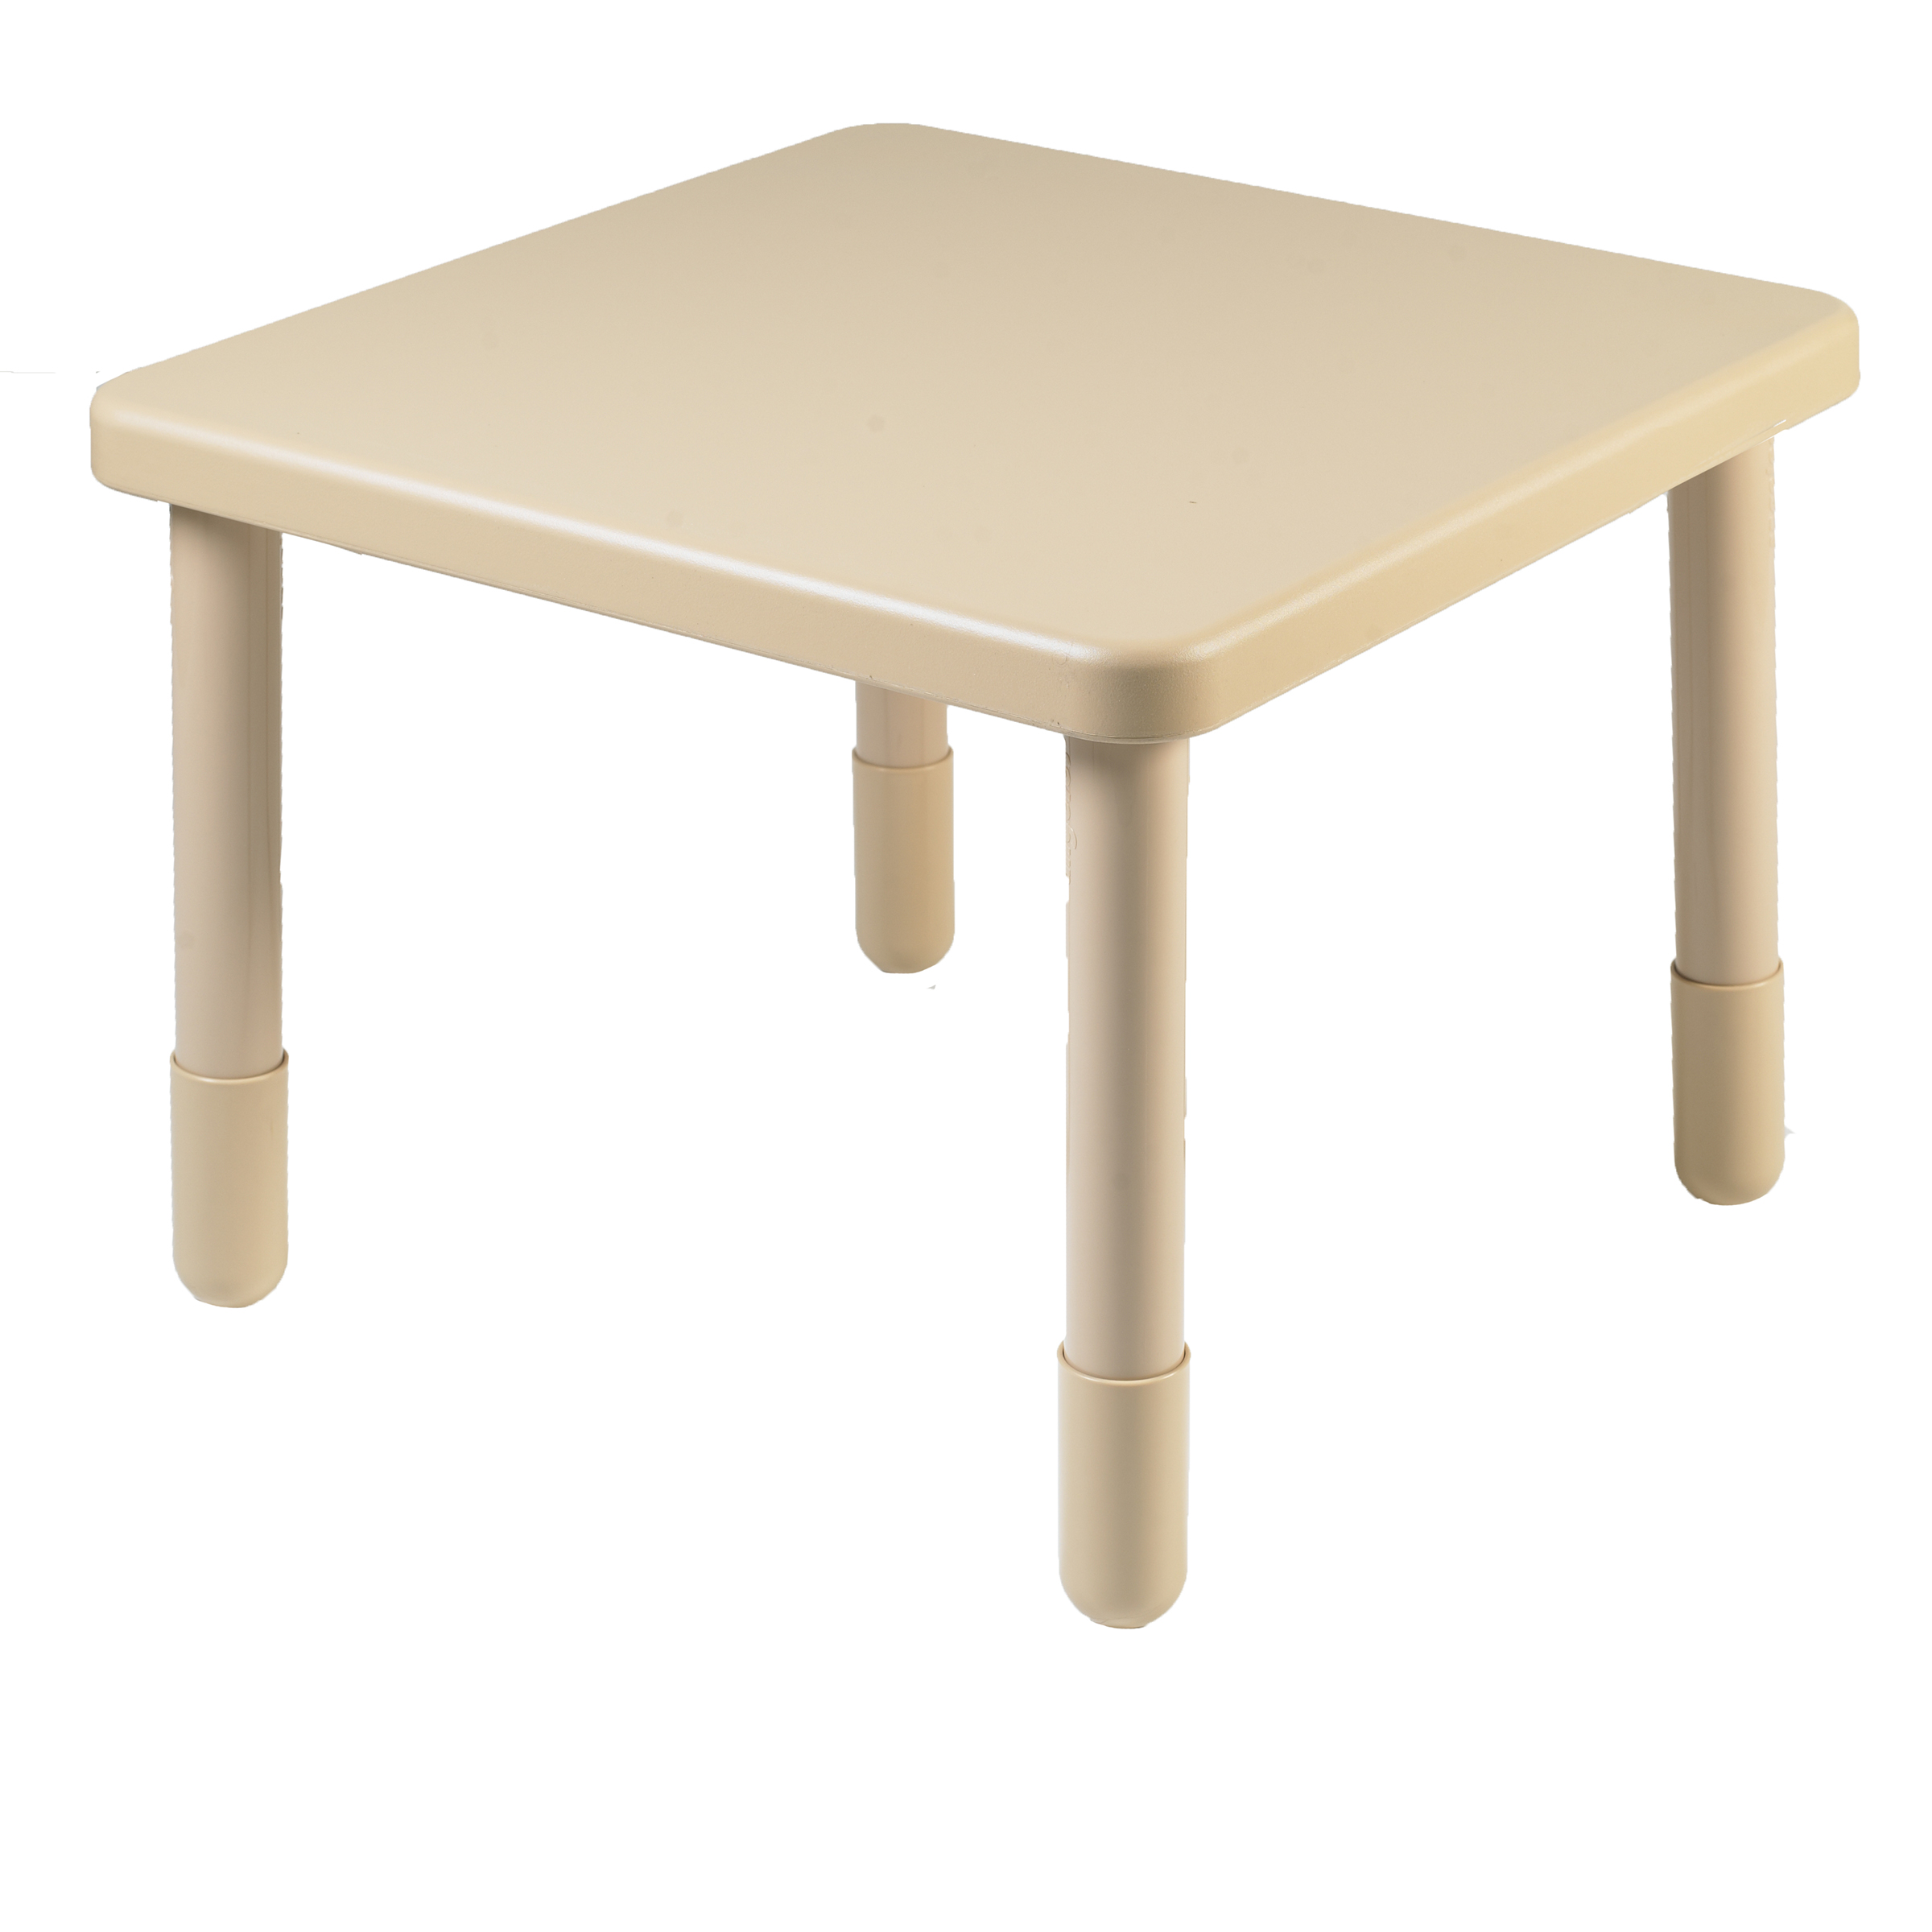 Value 71 cm  Square Table - Natural Tan with 56 cm  Legs